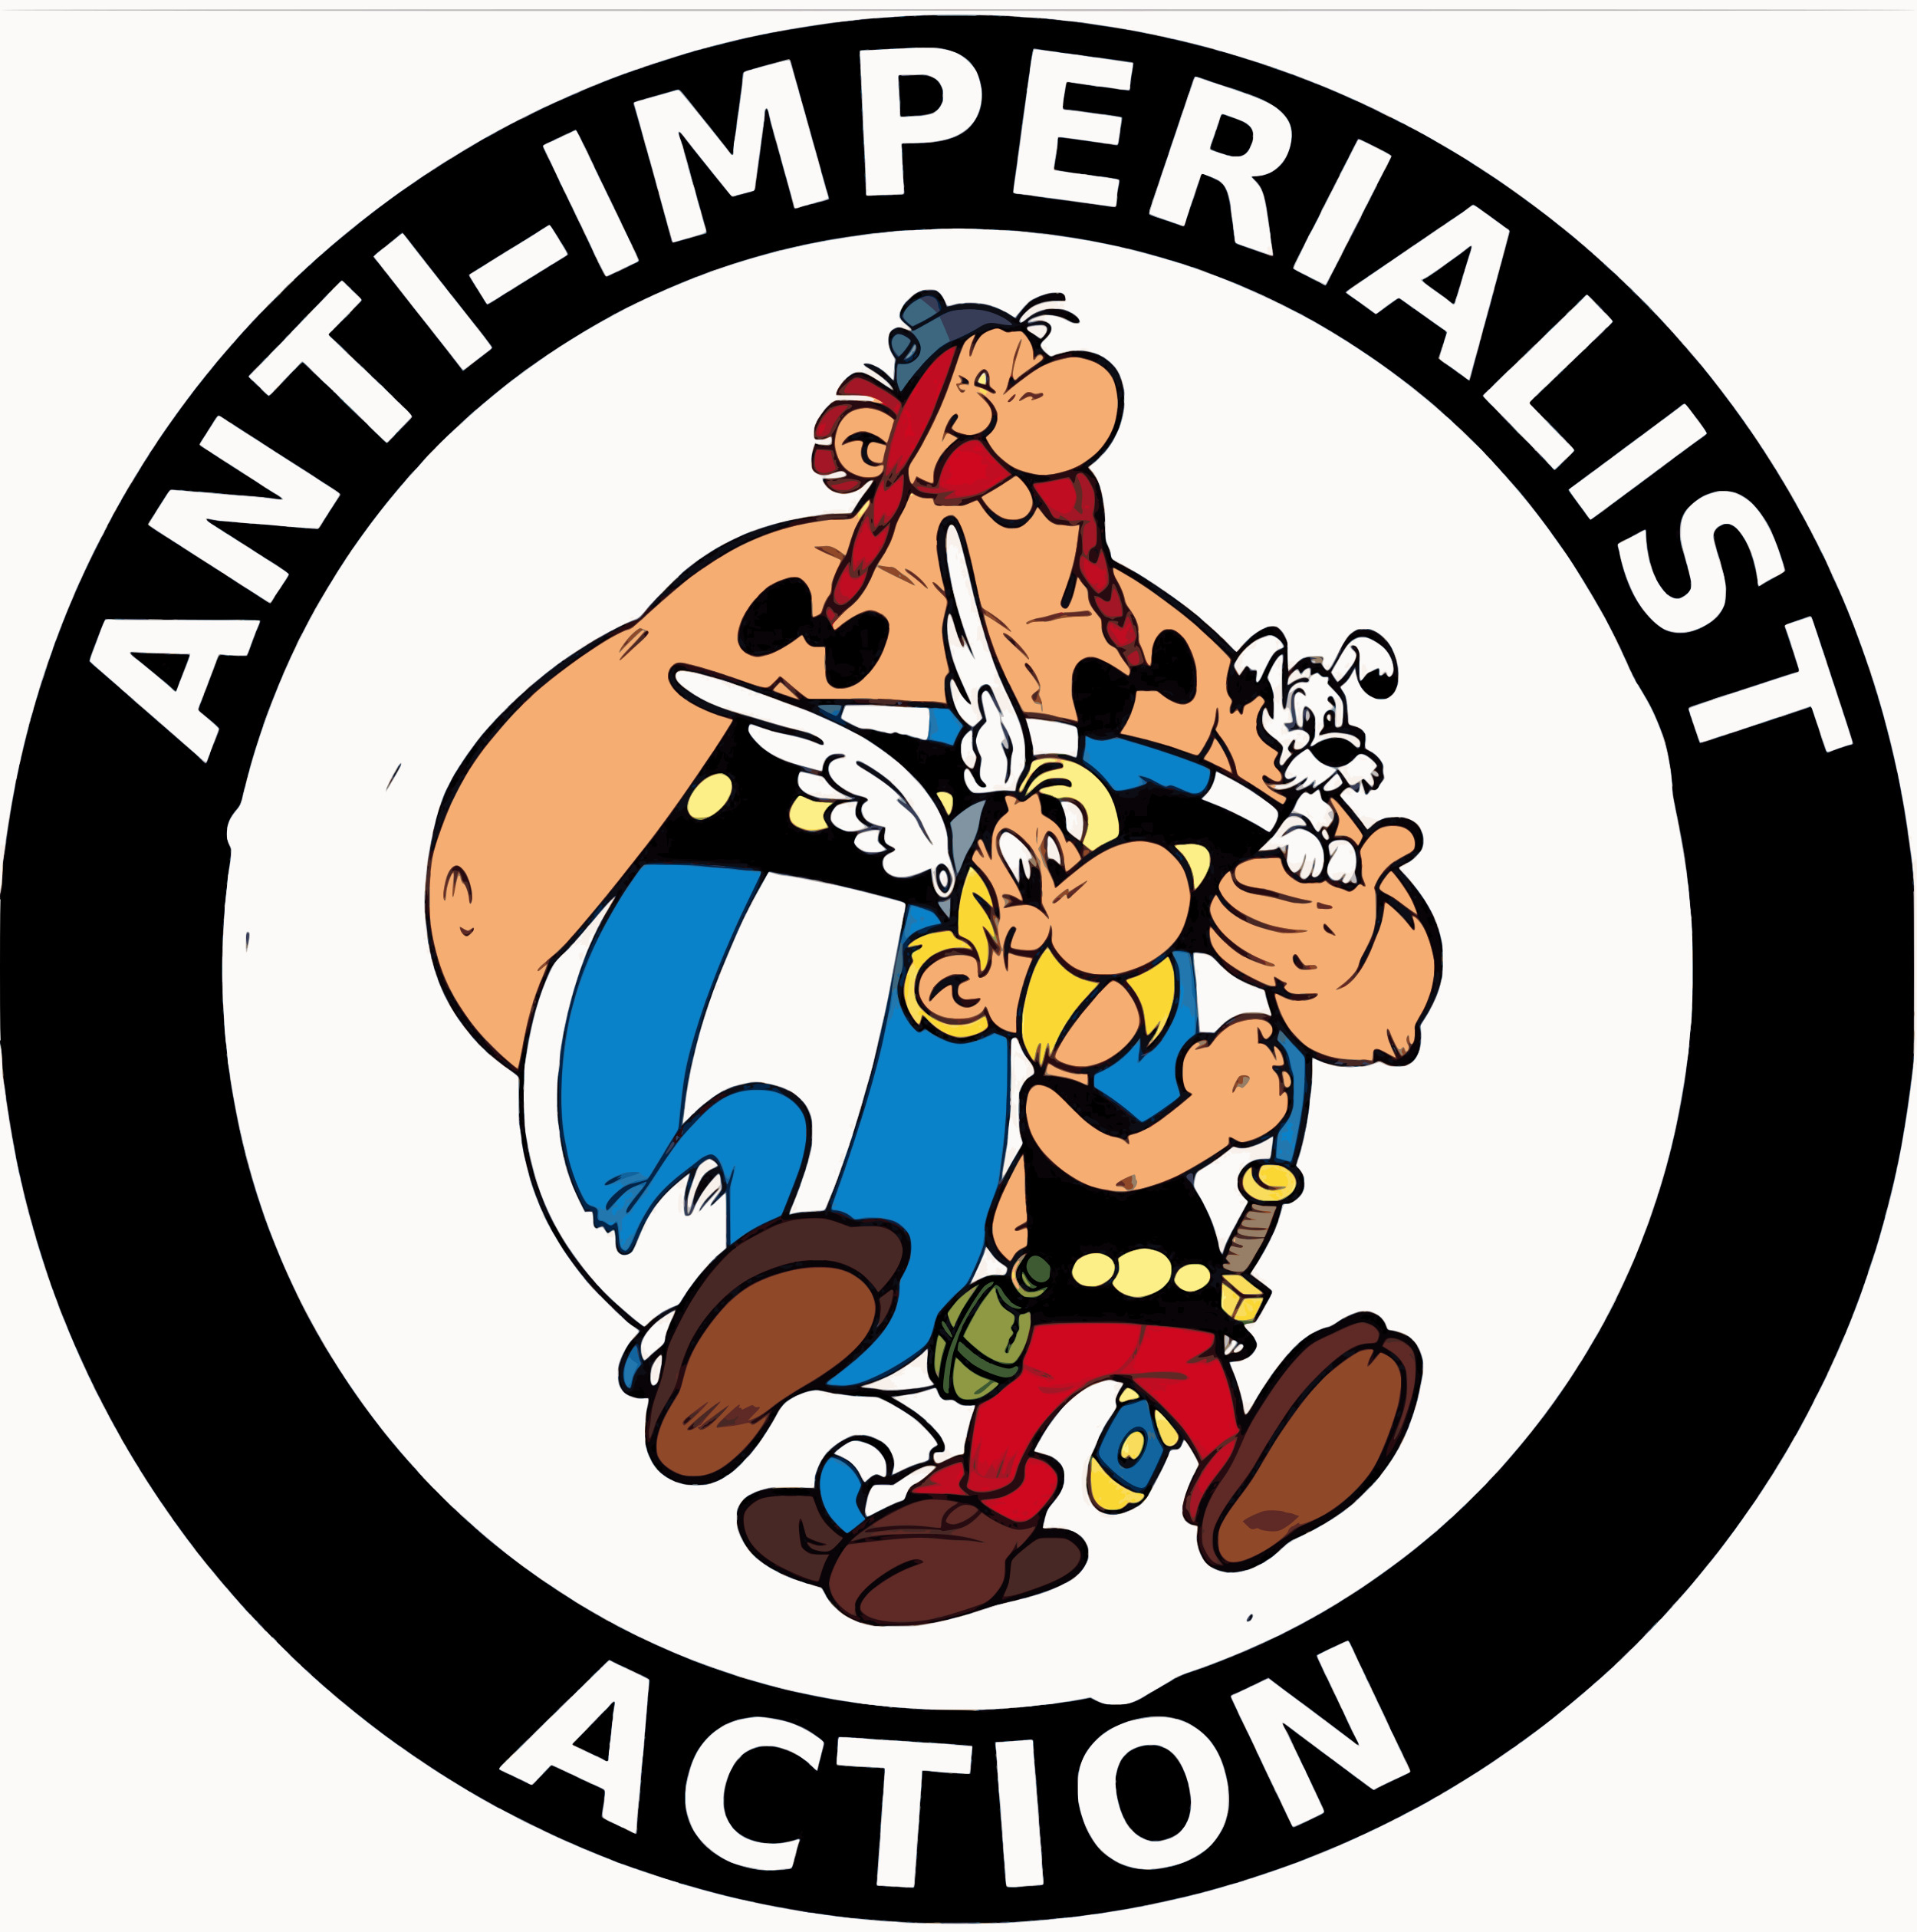 Anti-Imperialist action